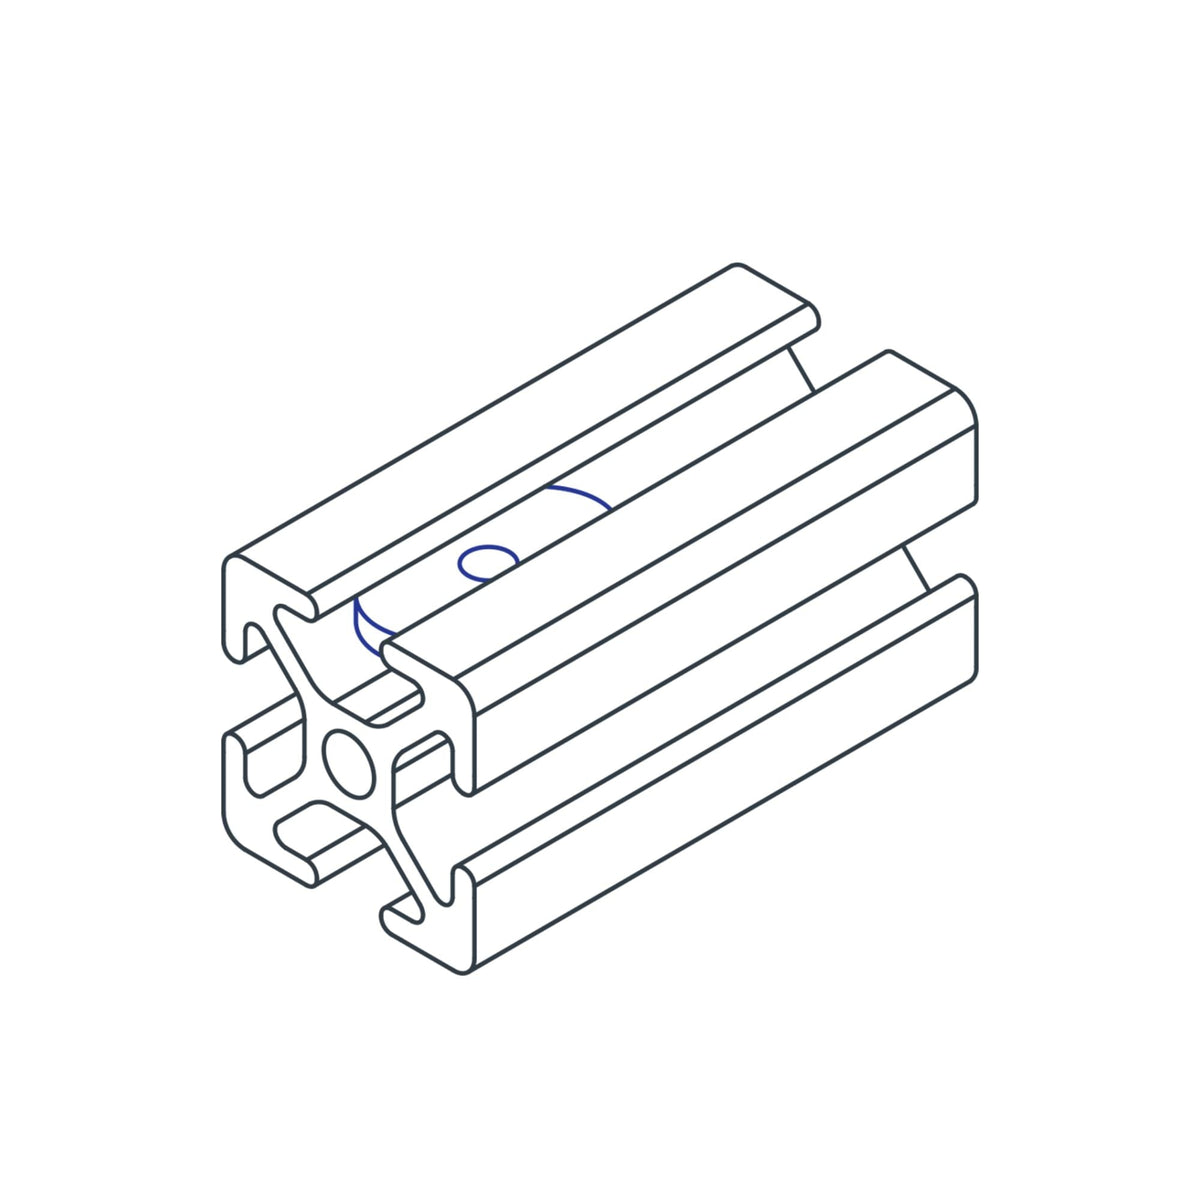 diagram of a slide-in t-nut in a corner connection